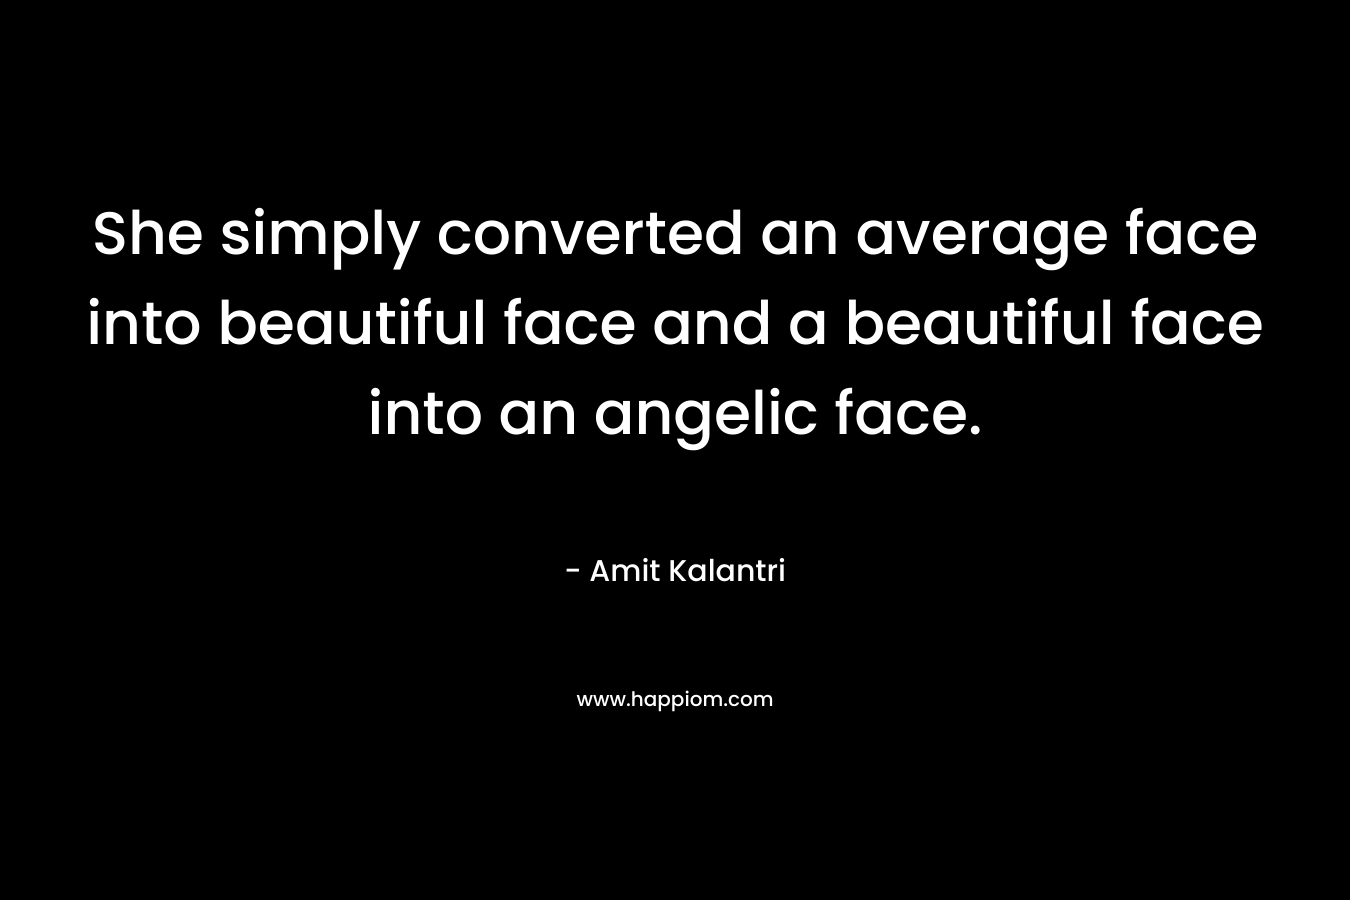 She simply converted an average face into beautiful face and a beautiful face into an angelic face. – Amit Kalantri